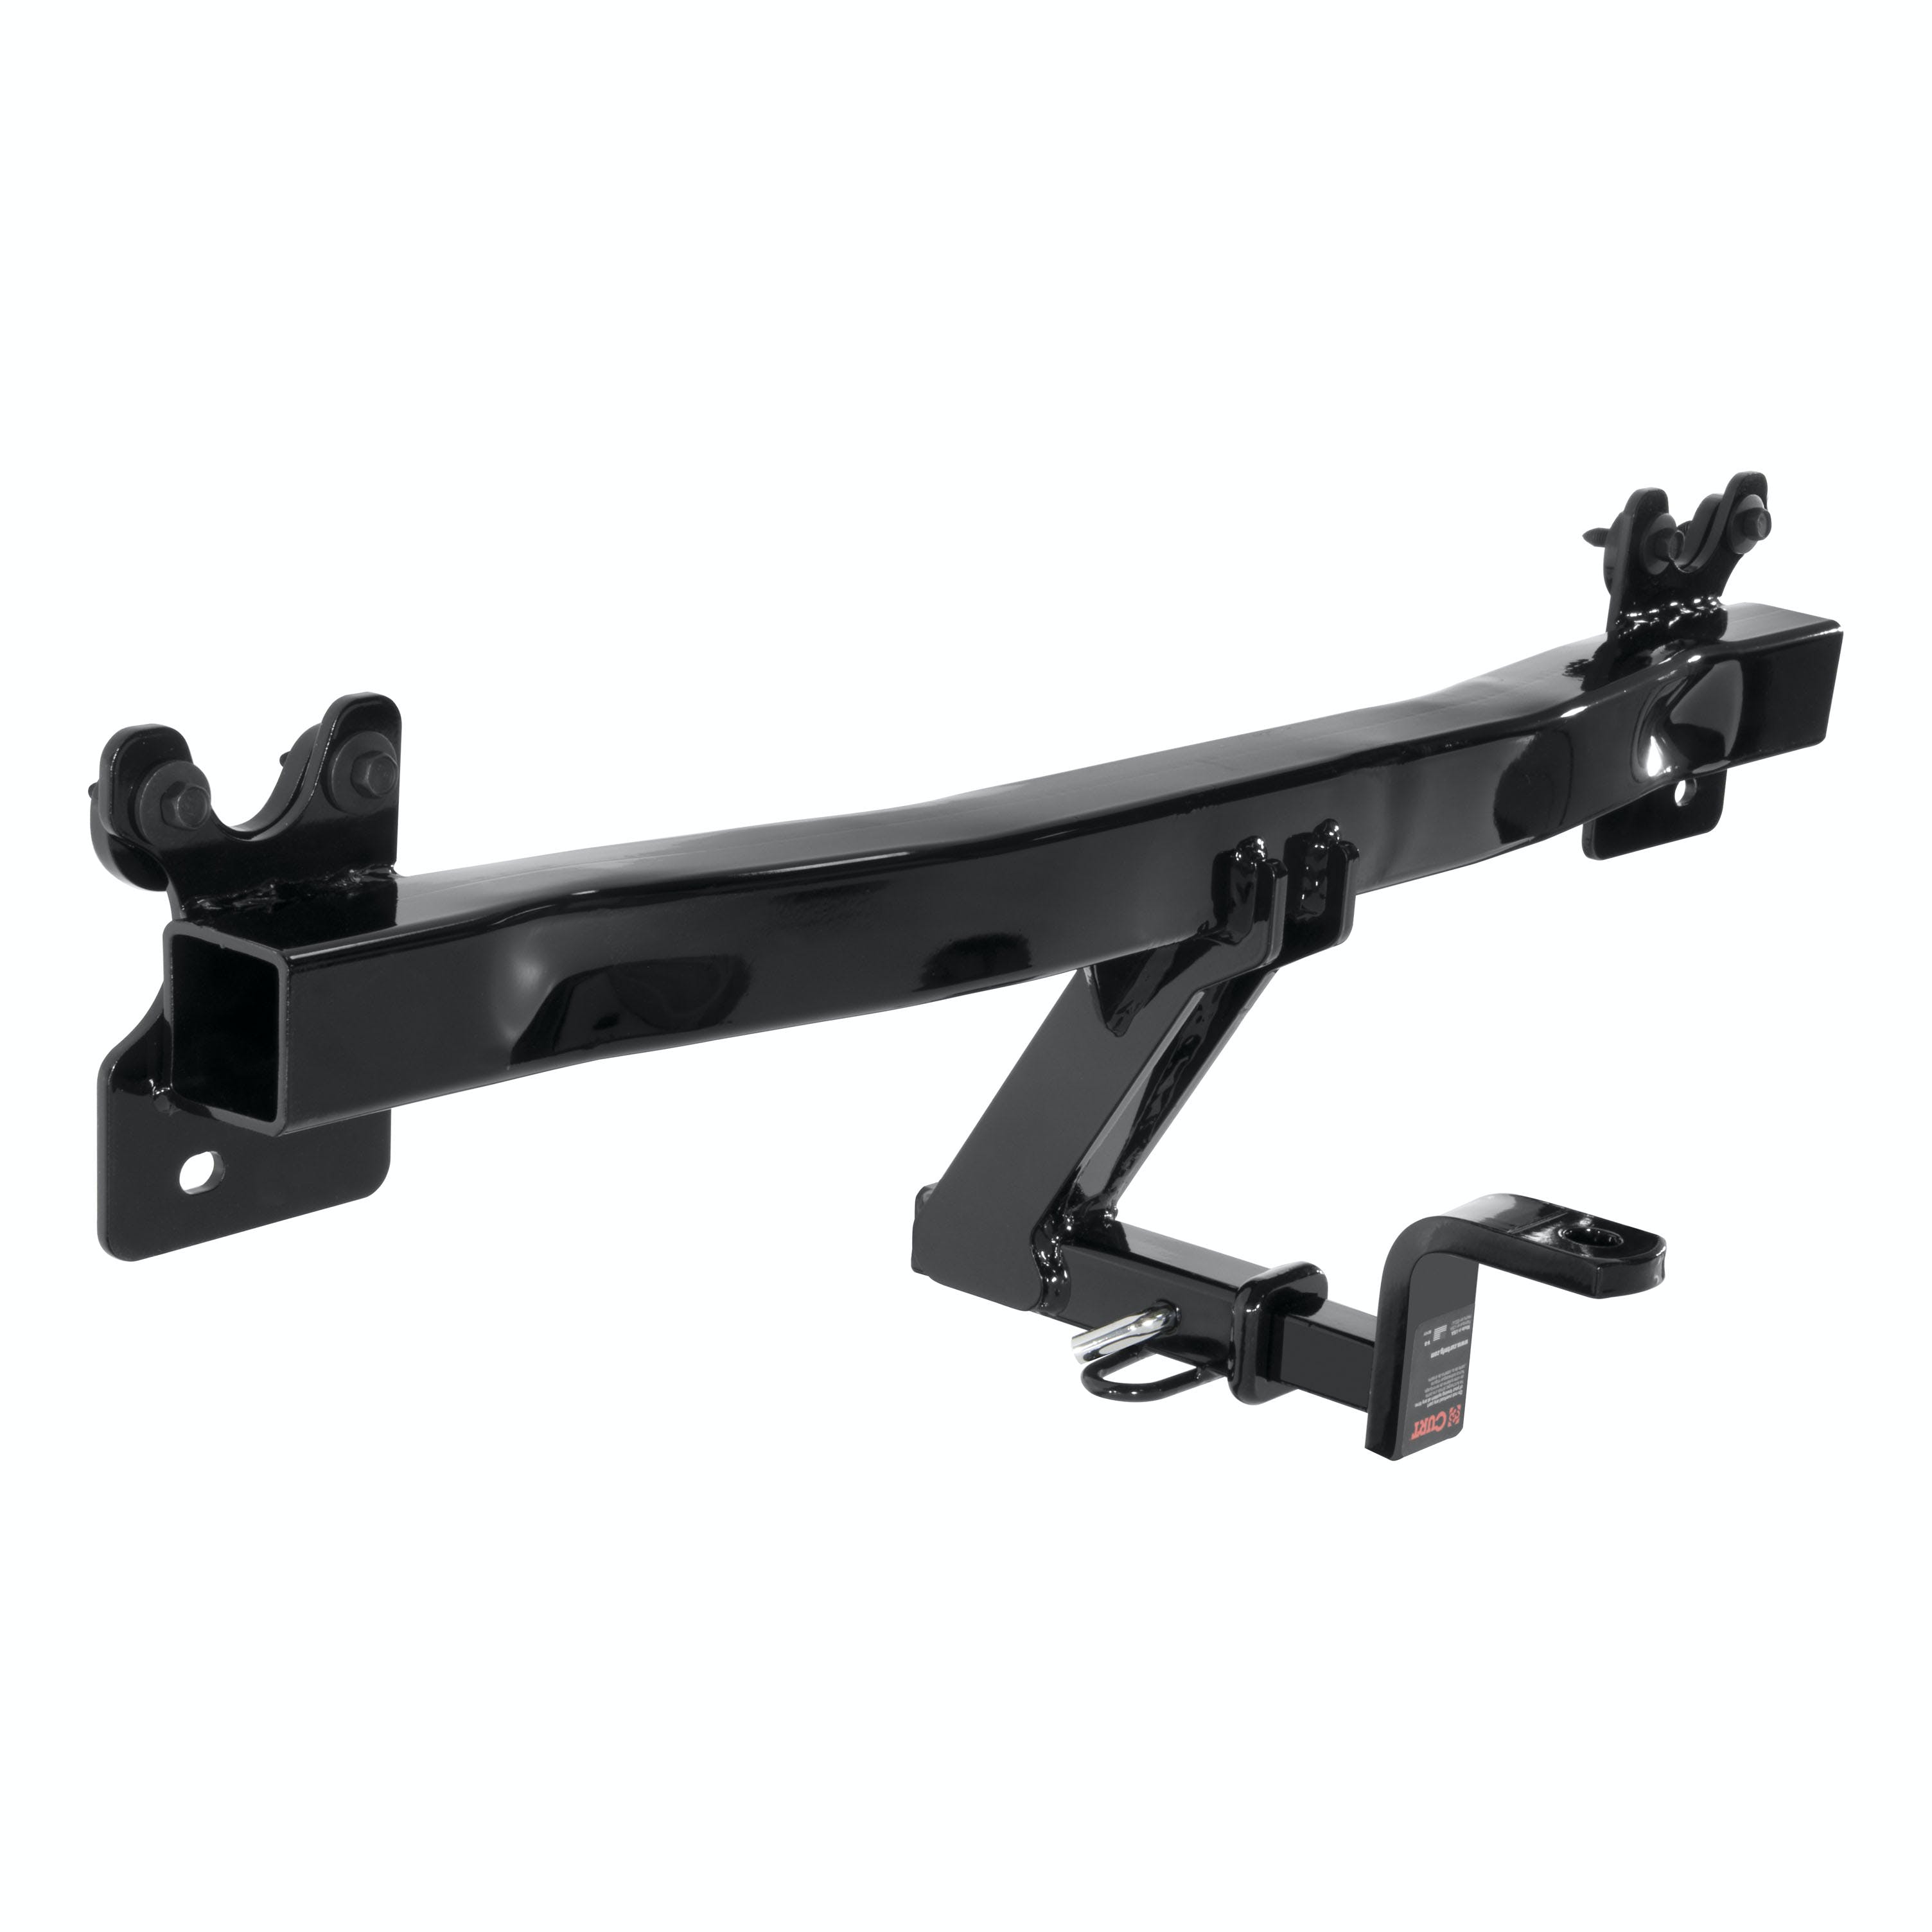 CURT 120663 Class 2 Hitch, 1-1/4 Mount, Select Volvo S60, V60, Cross Country, V70, XC70